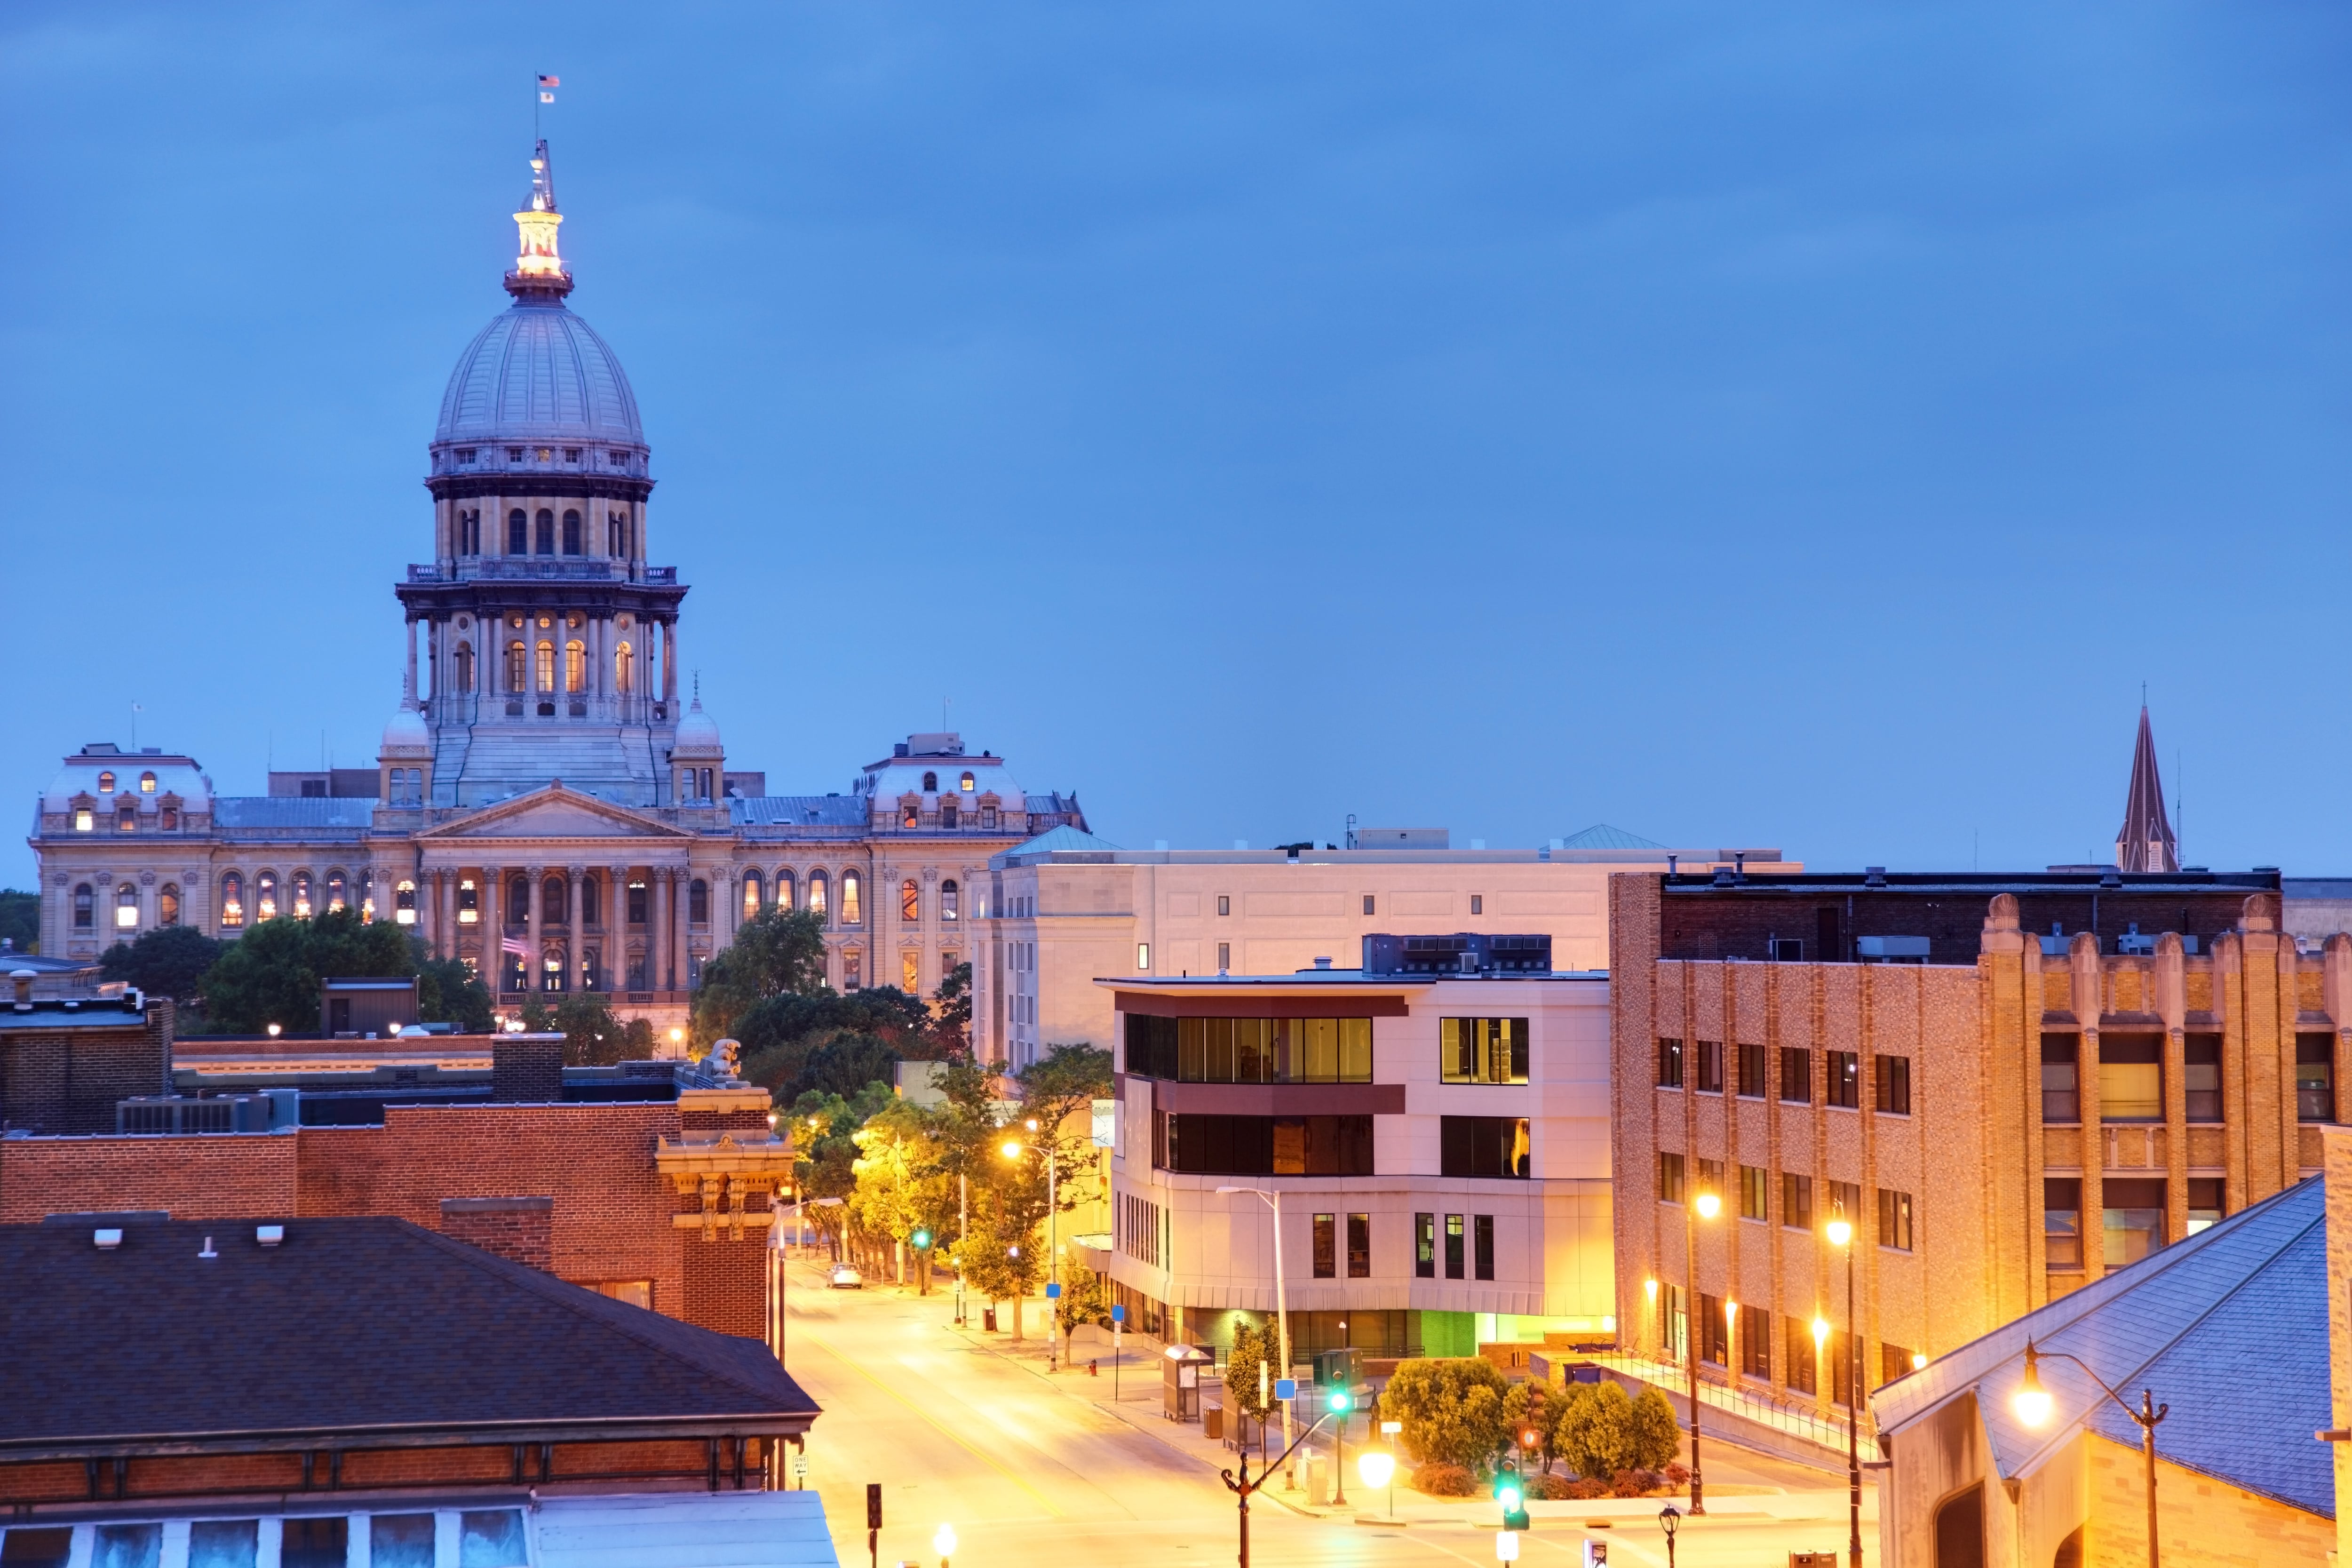 The Illinois State Capitol is seen along with other buildings and a street illuminated during the early evening.